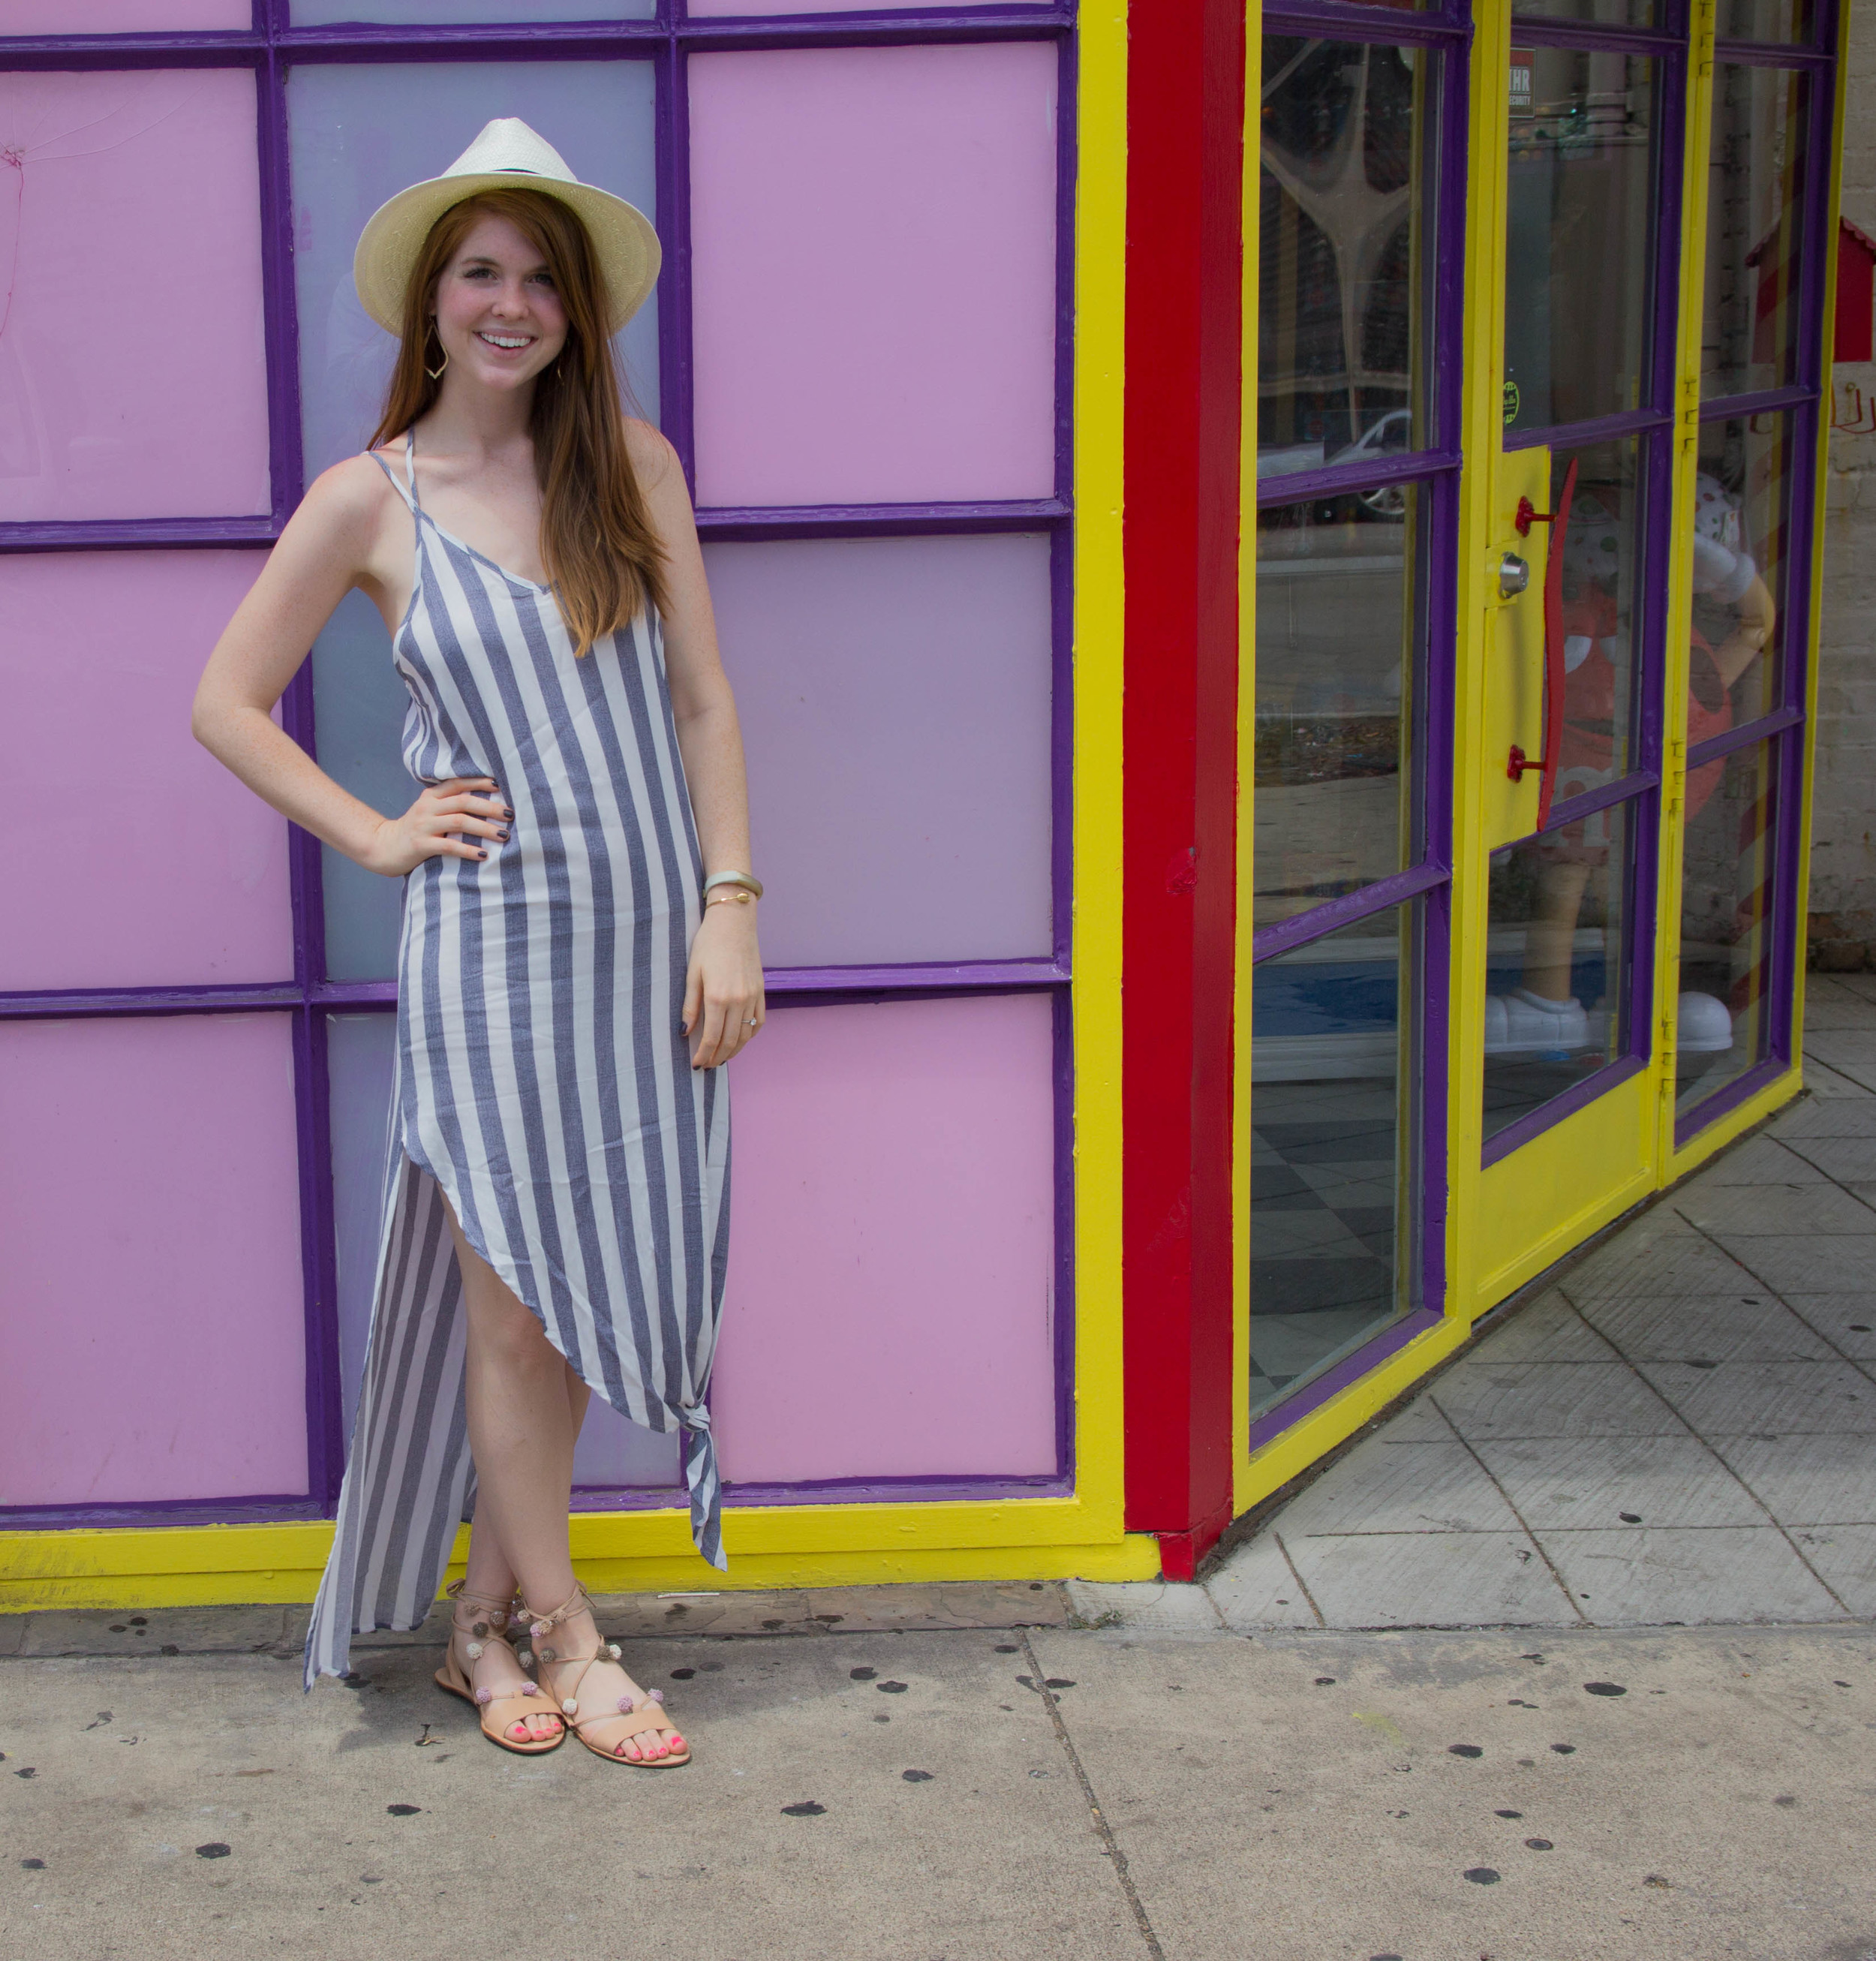 nordstrom bottom knot stripe maxi dress, asos white straw panama hat, kendra scott sophee earrings, loeffler randall lace up pom pom sandals, essie smokin hot, gold arrow cuff, how to tie a knot in clothing, knotted tank, knotted dress